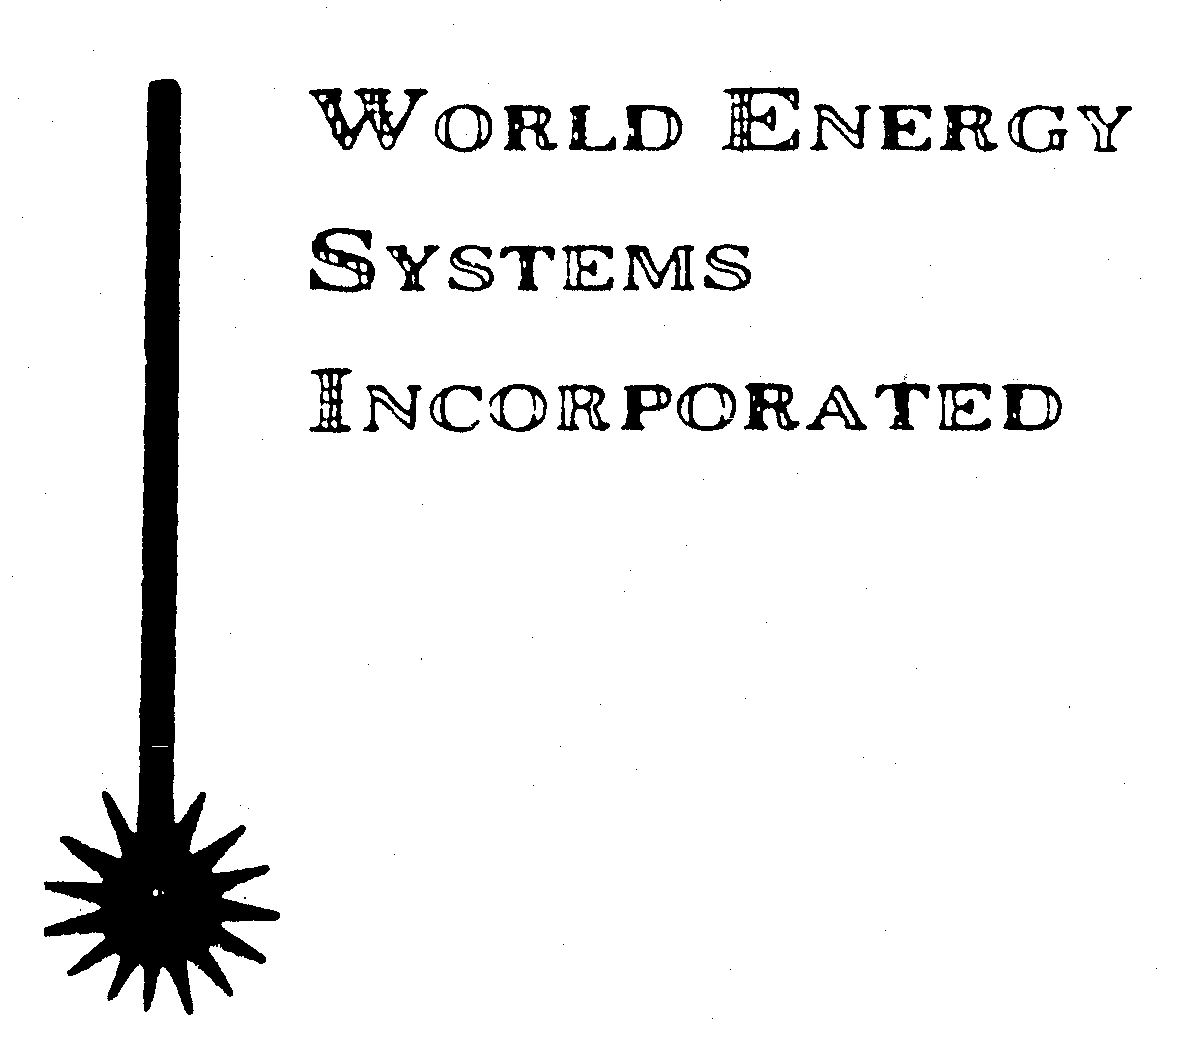  WORLD ENERGY SYSTEMS INCORPORATED